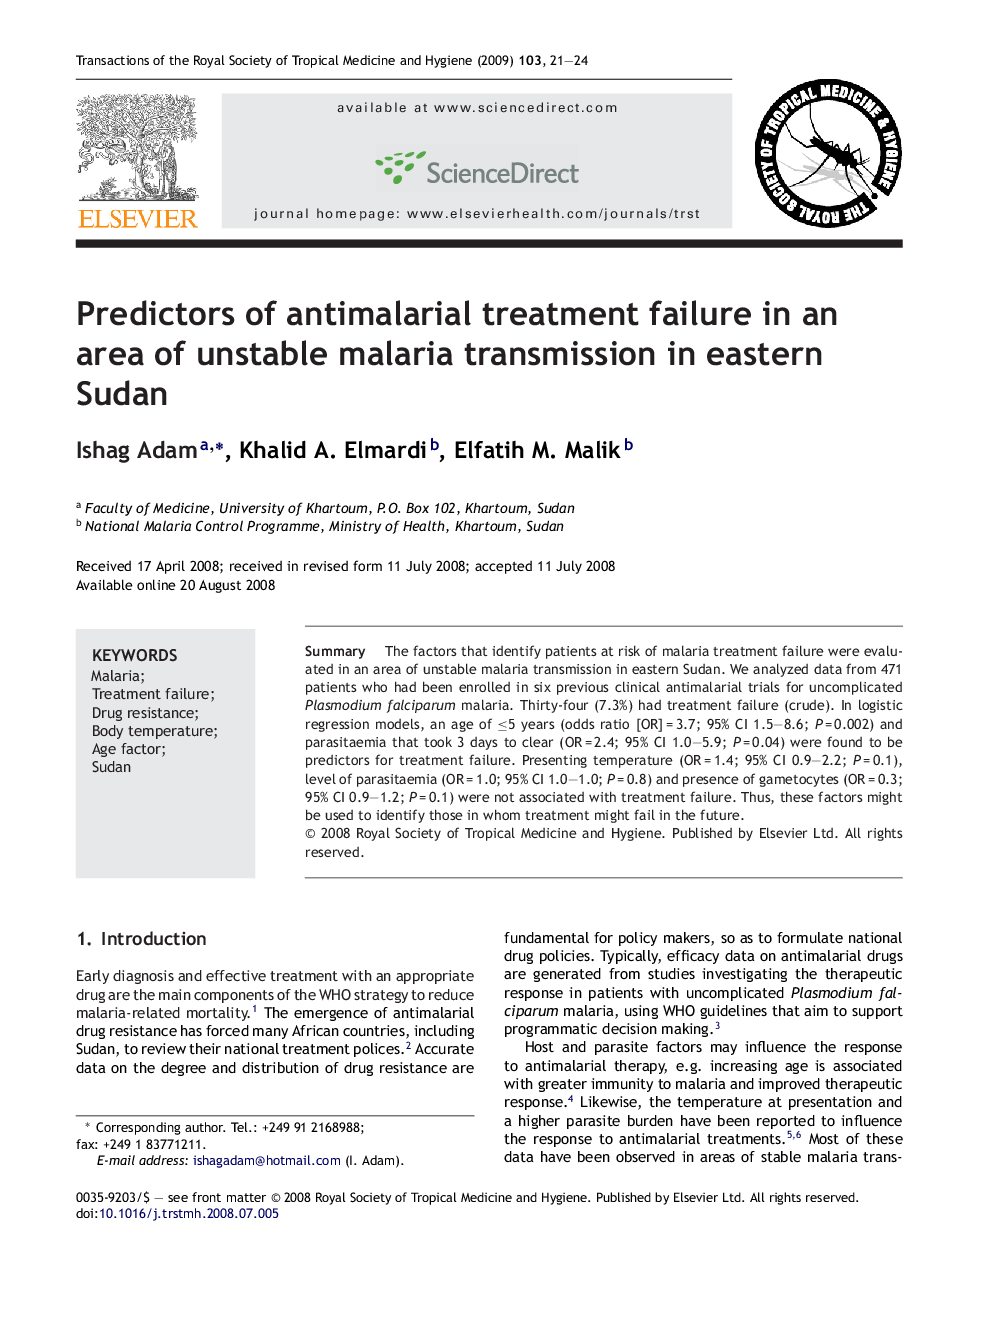 Predictors of antimalarial treatment failure in an area of unstable malaria transmission in eastern Sudan